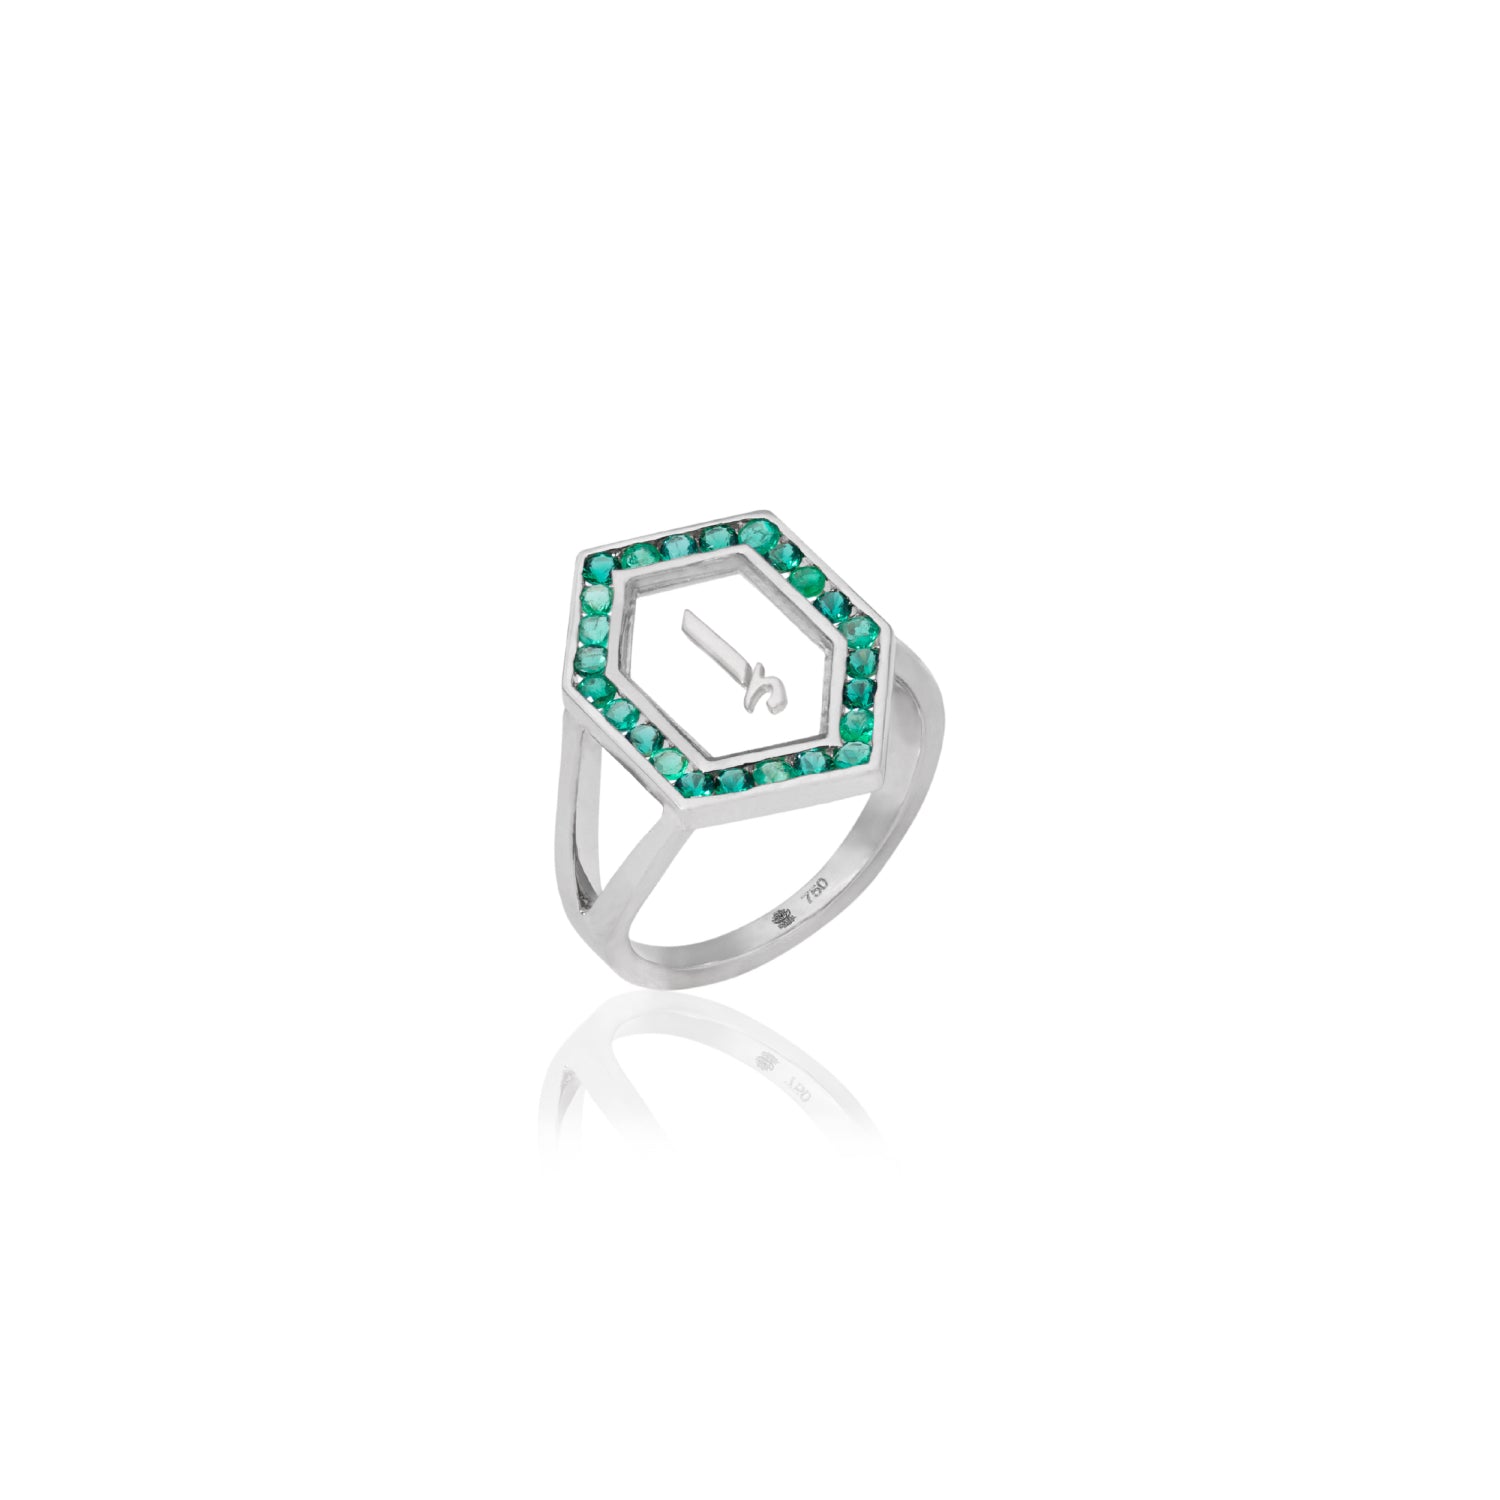 Qamoos 1.0 Letter إ Emerald Ring in White Gold